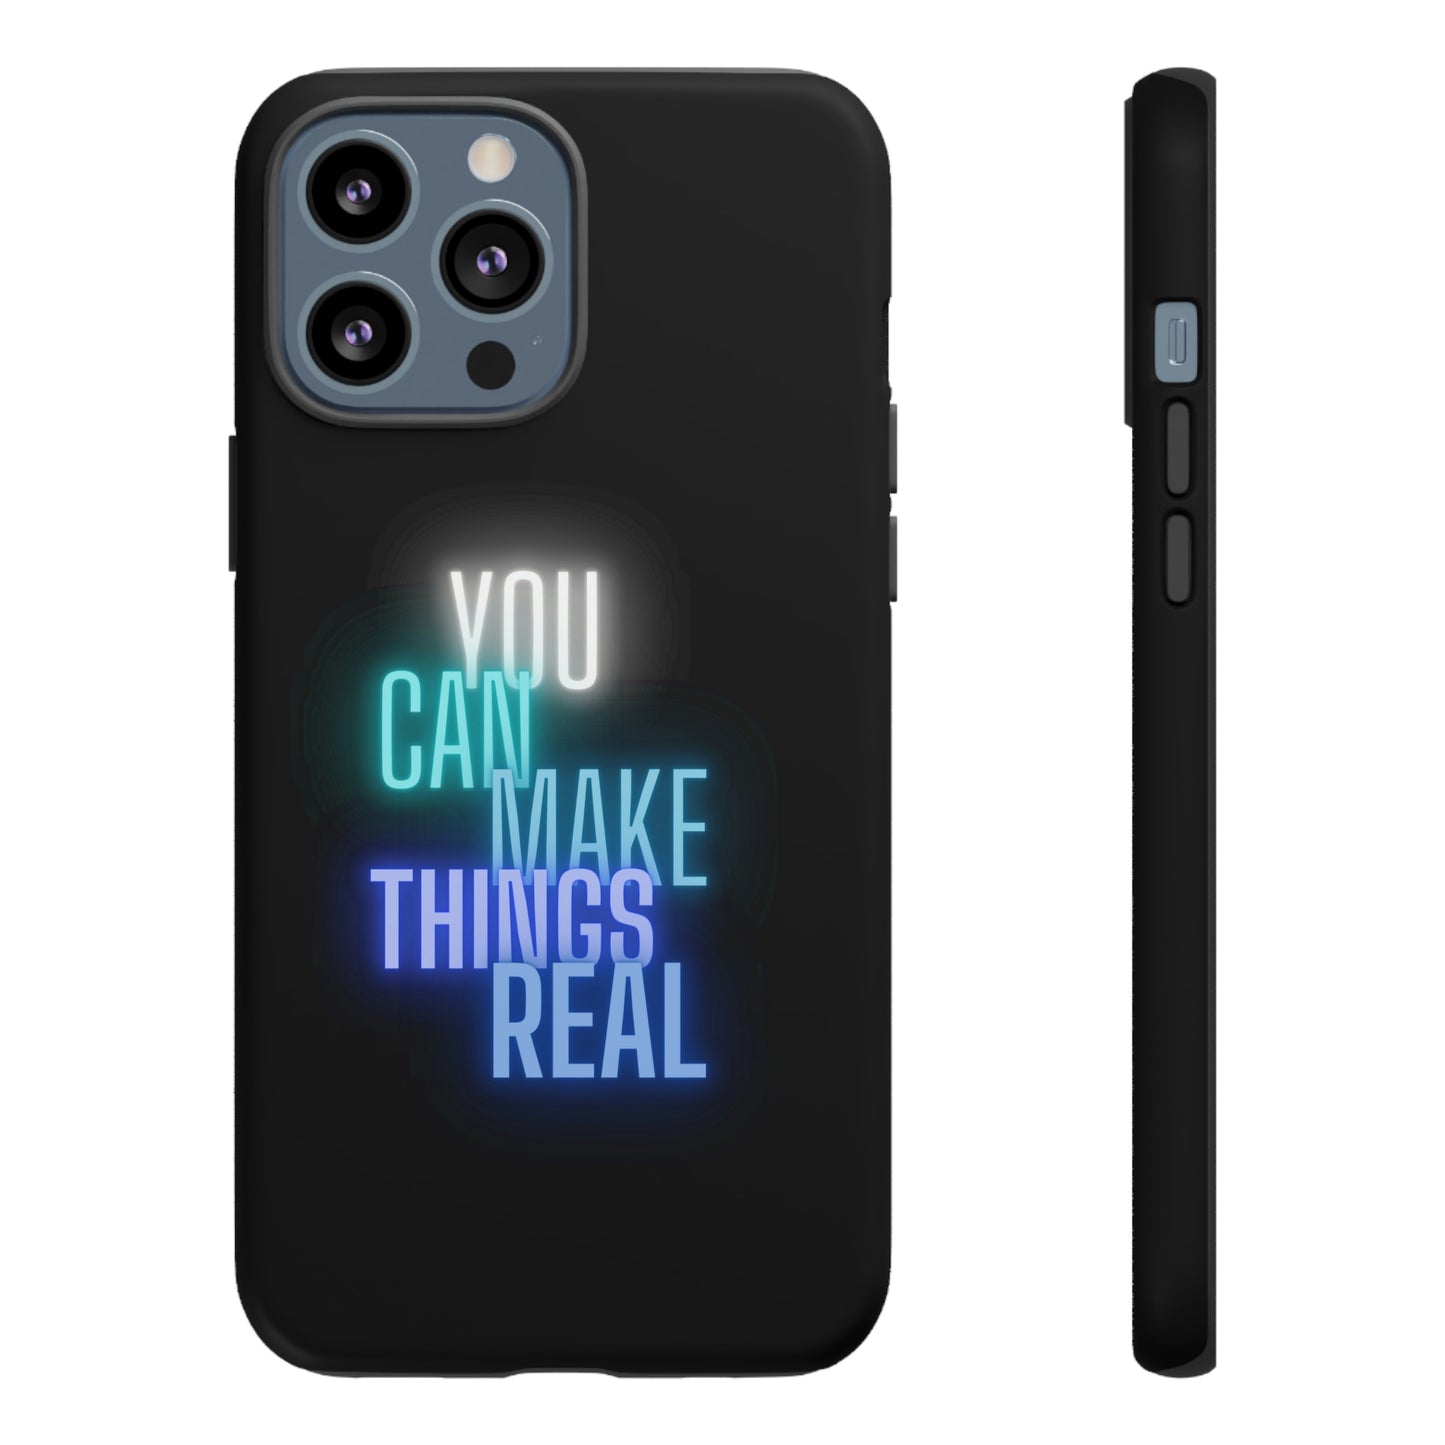 Inspire Empire || Tough Cases || You can make things real